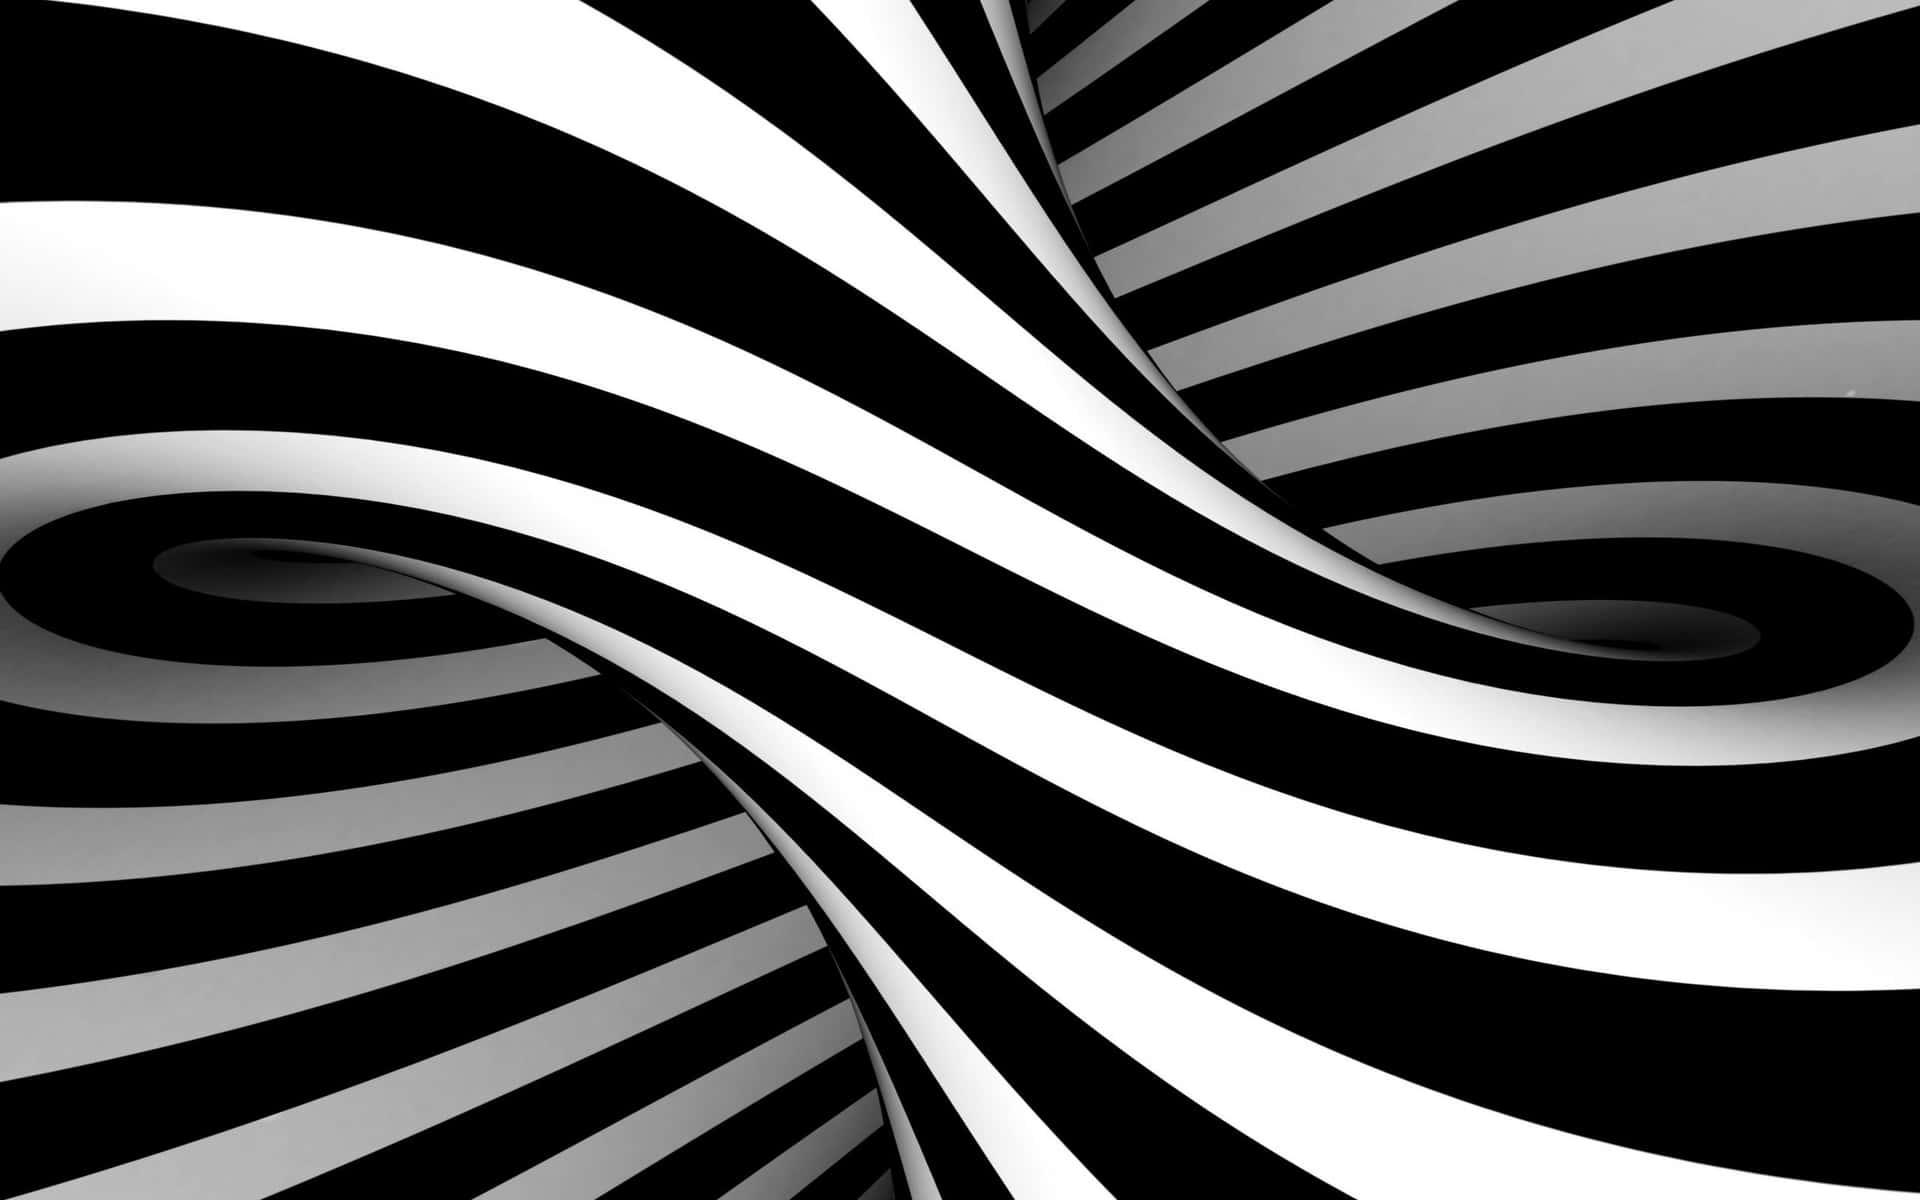 Black and White Stripes - Balance and Visual Interest Wallpaper